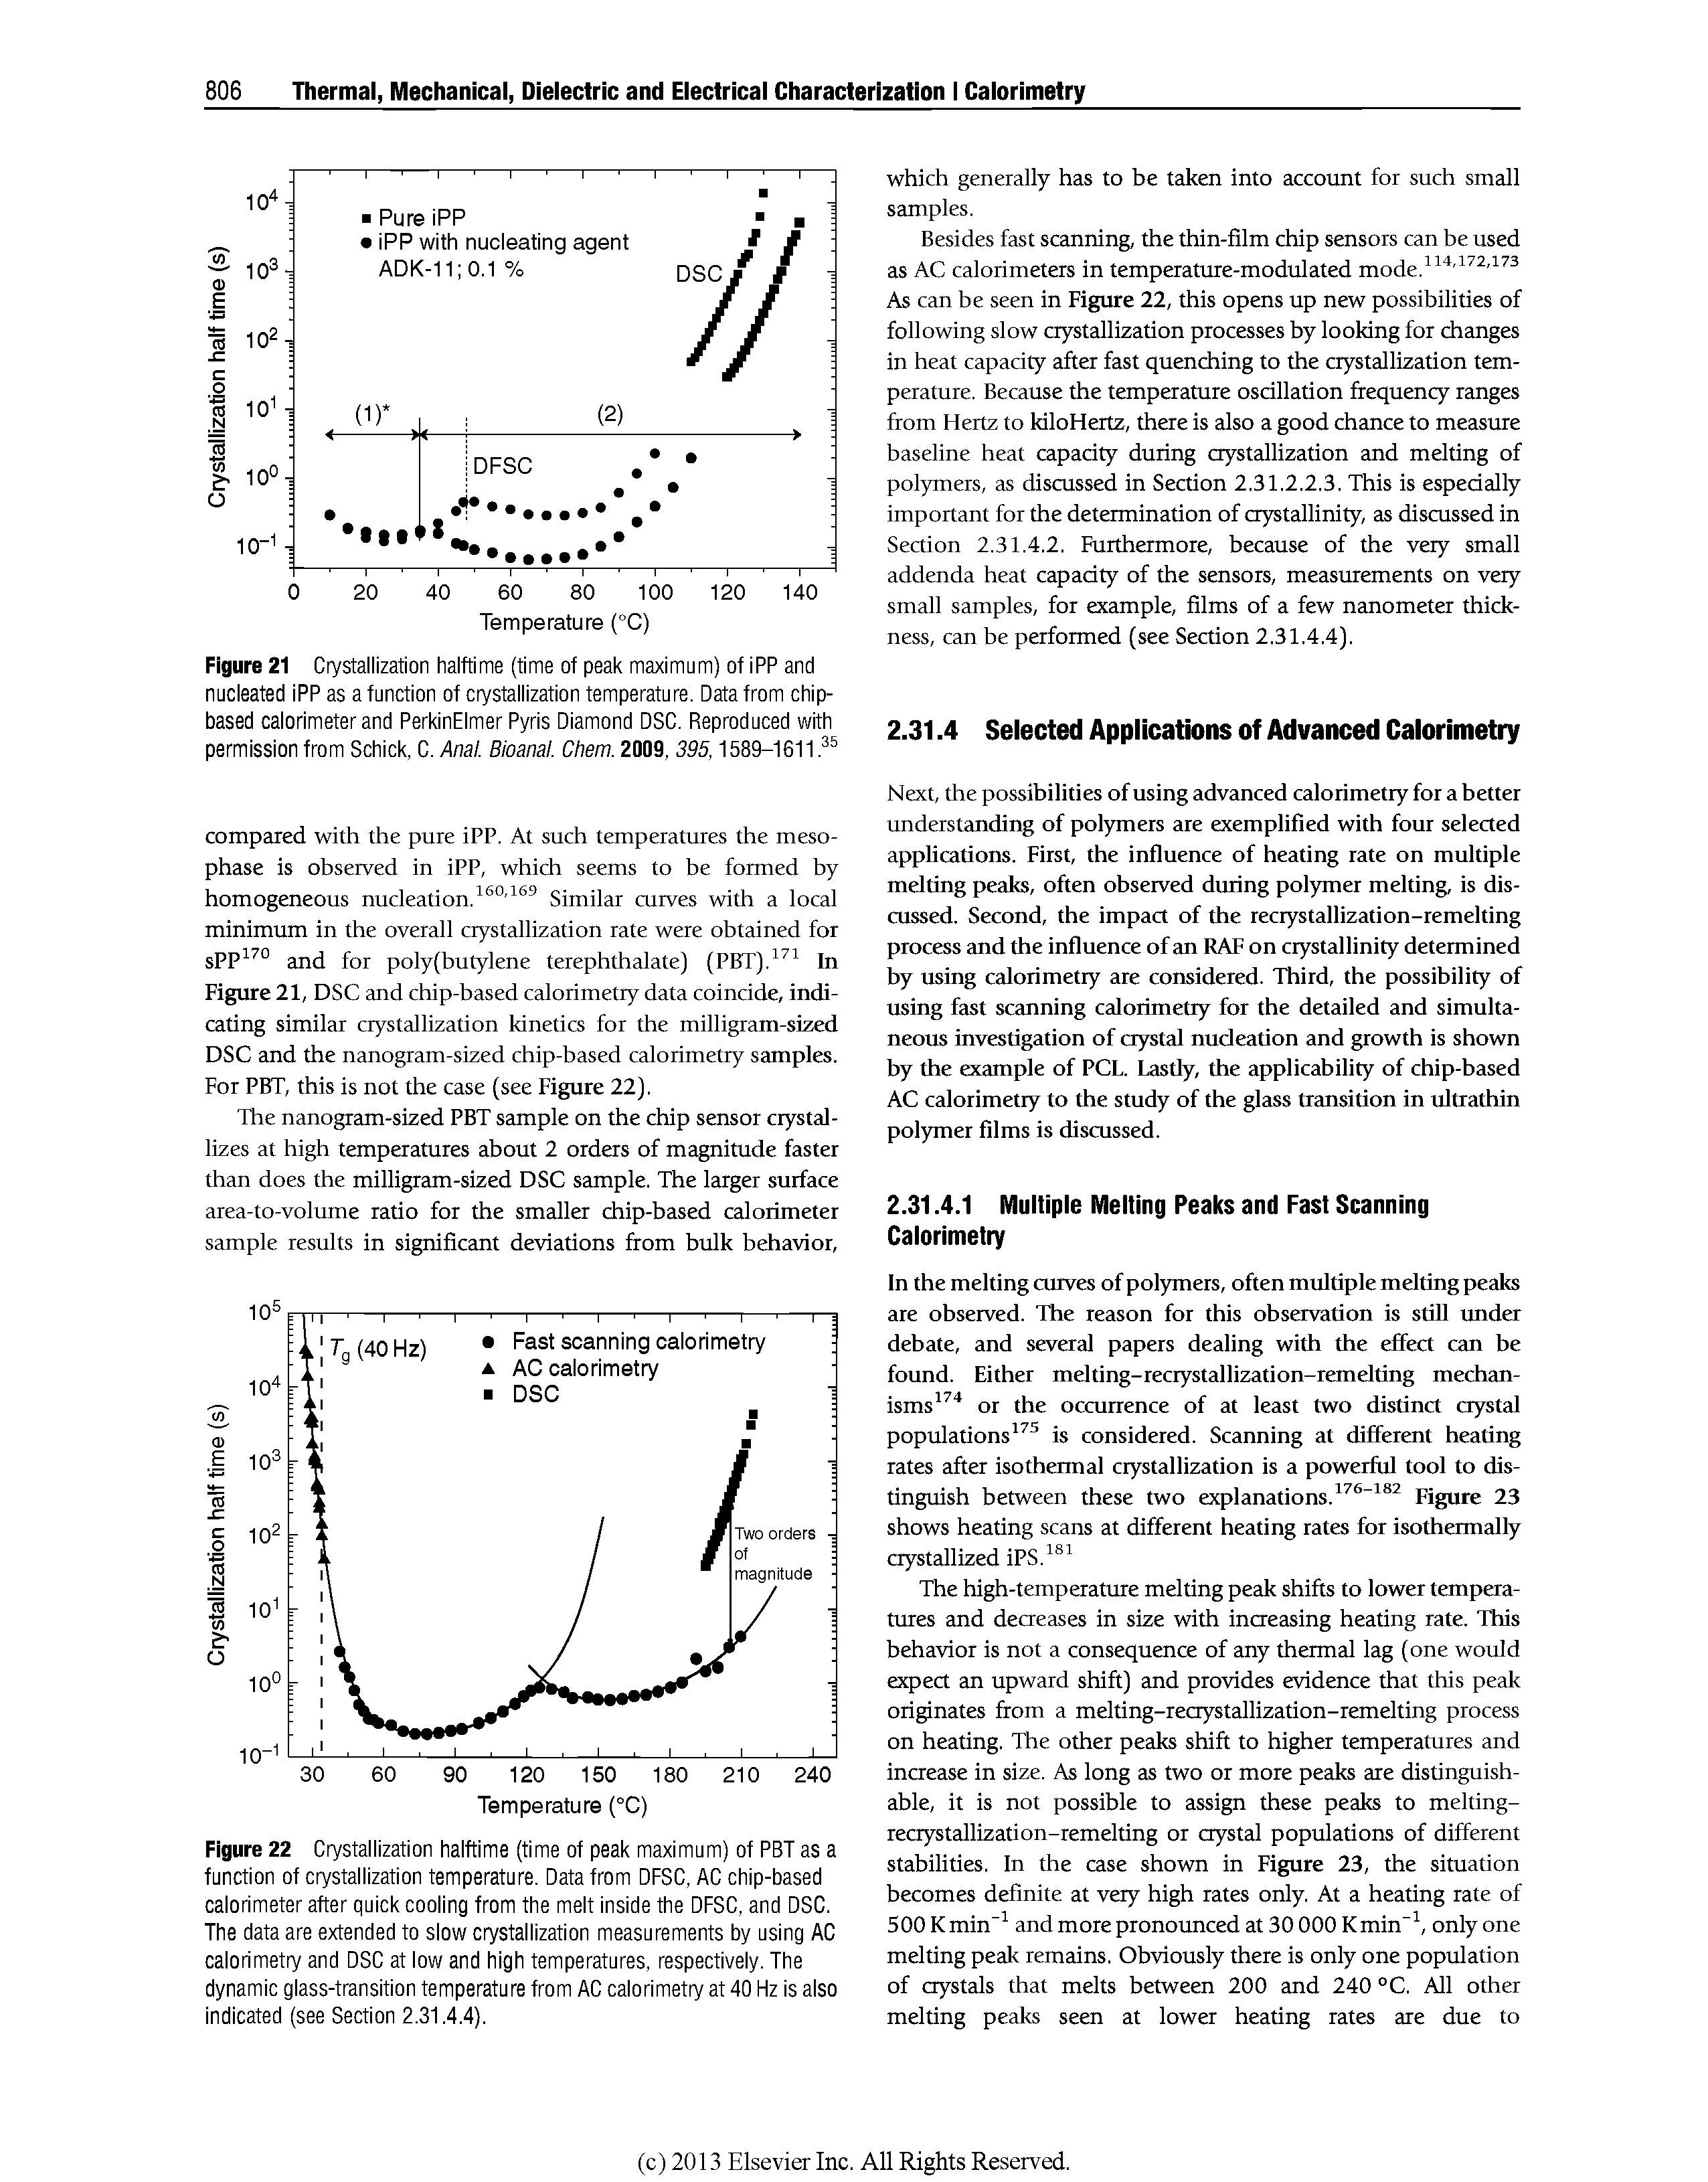 Figure 21, DSC and chip-based calorimetry data coincide, indicating similar crystallization kinetics for the milligram-sized DSC and the nanogram-sized chip-based calorimetry samples. For PBT, this is not the case (see Figure 22).